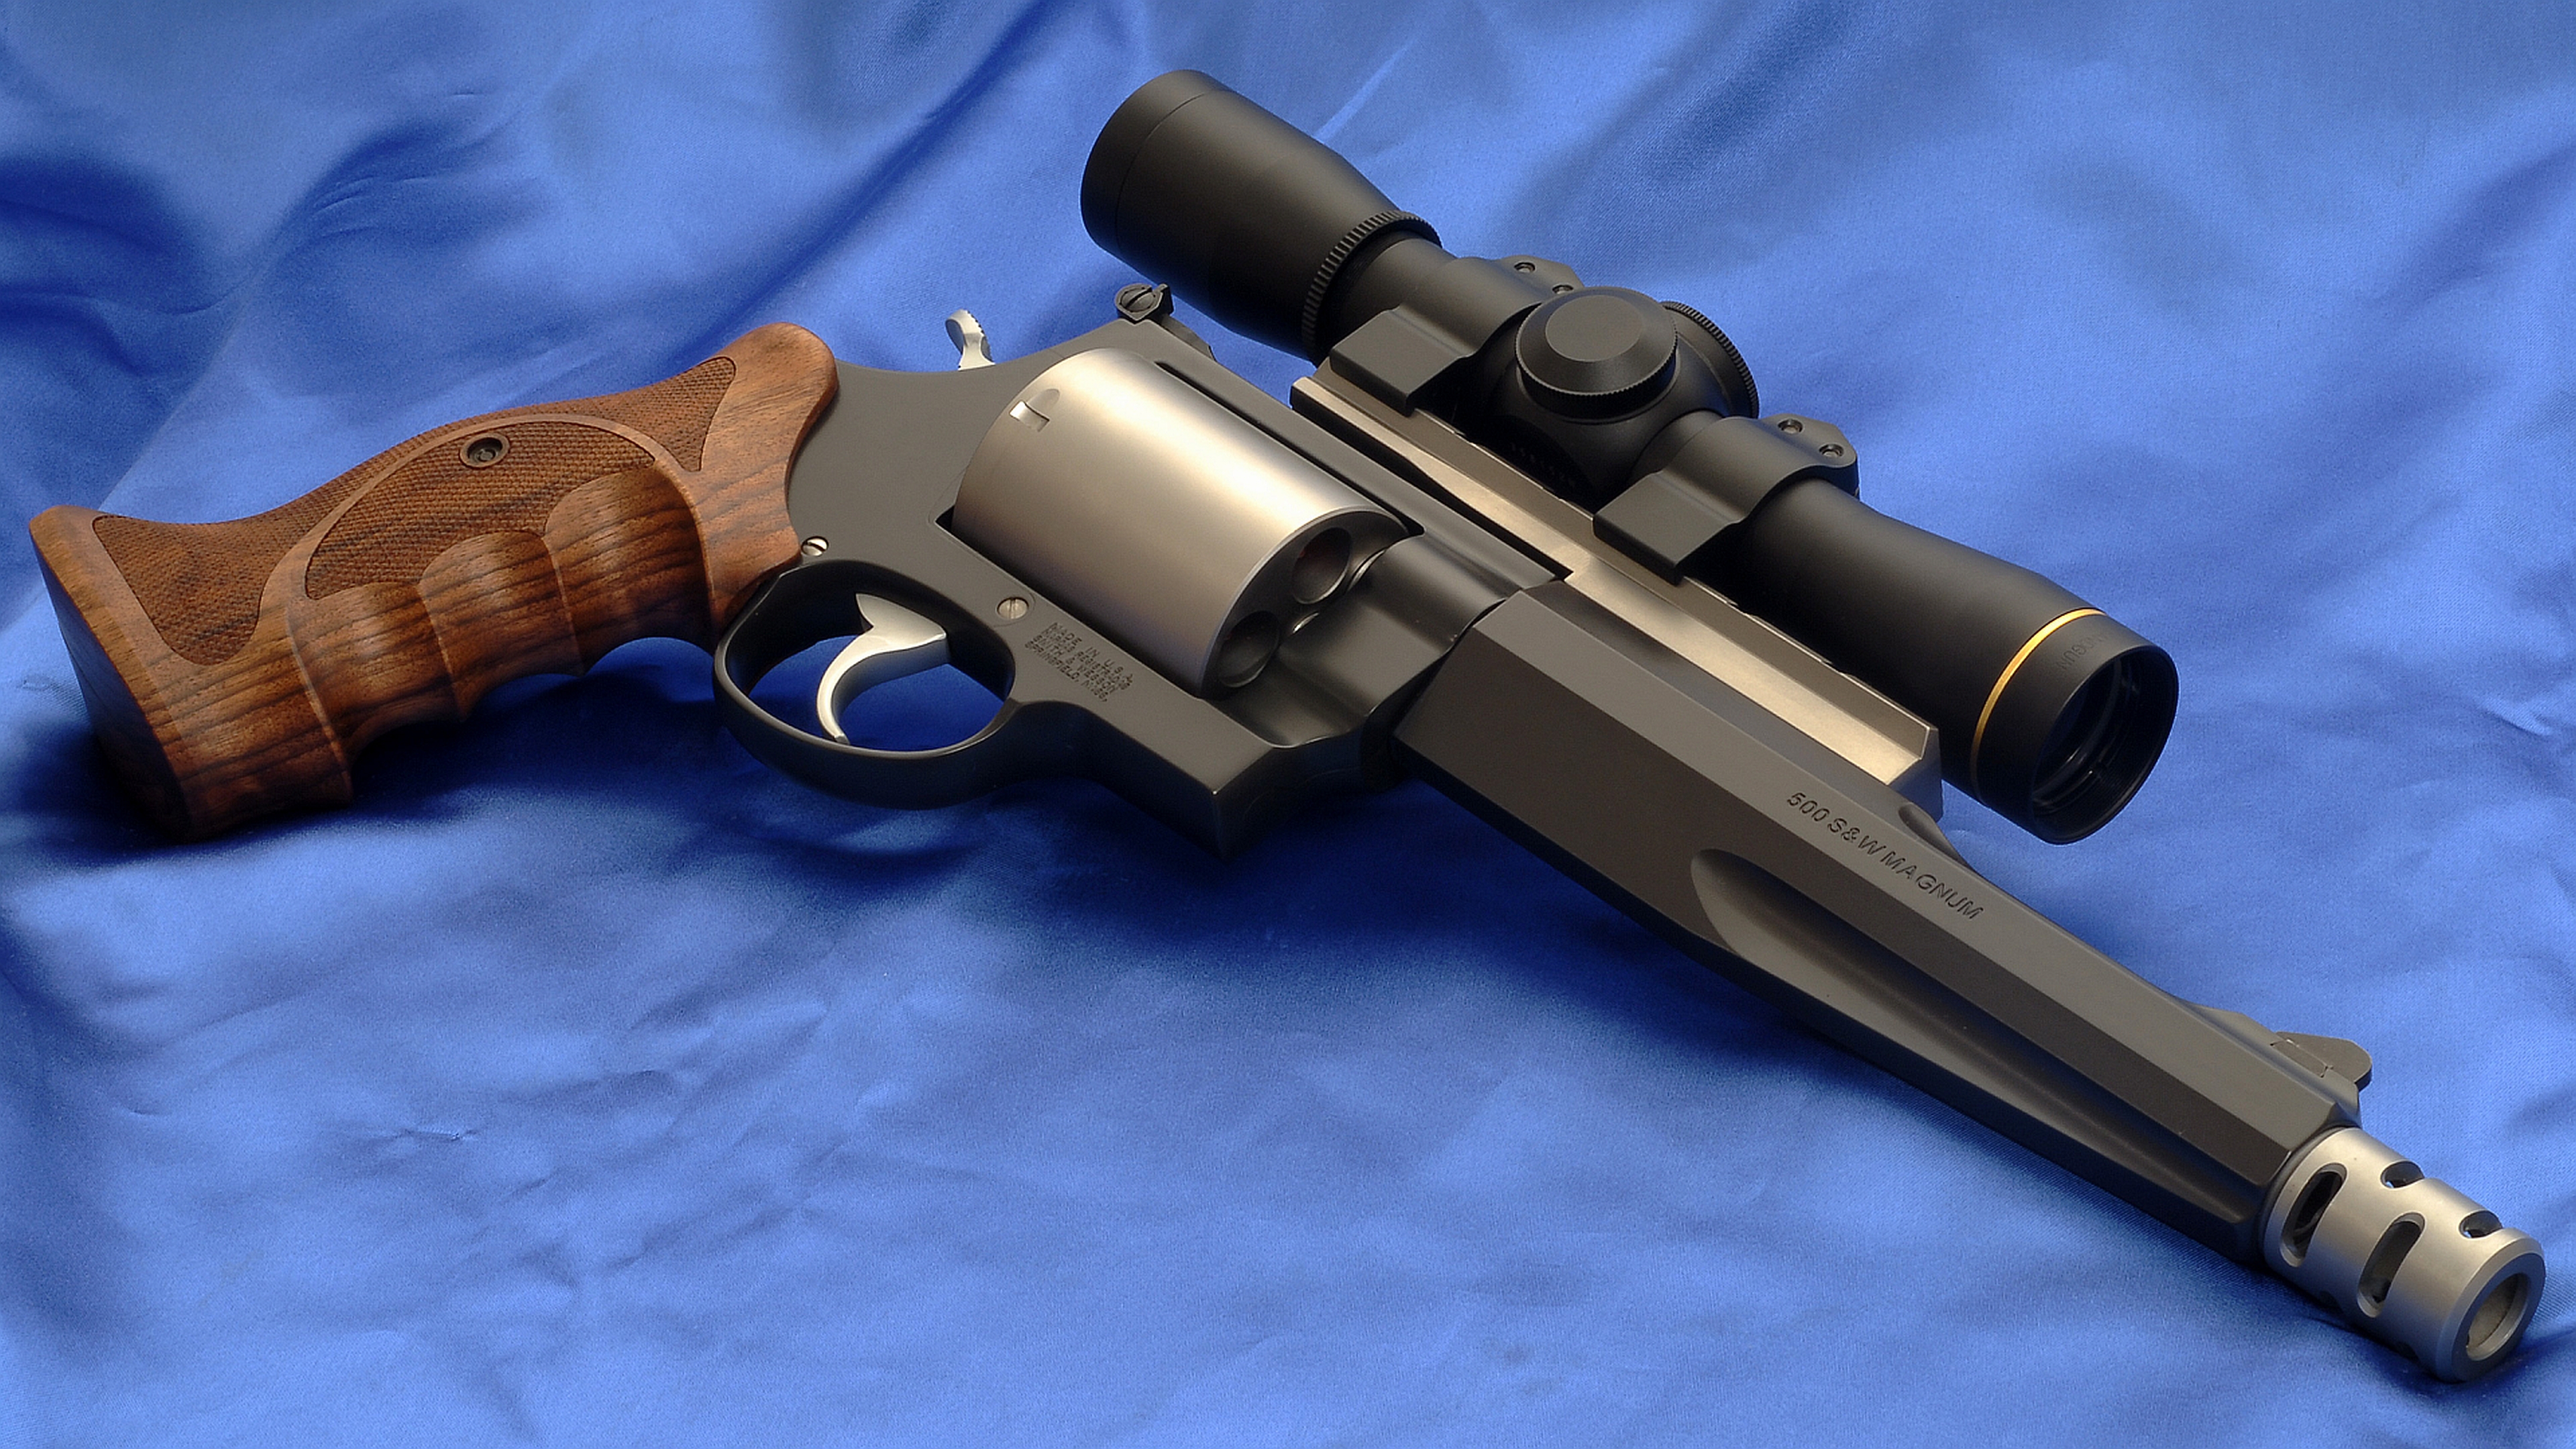 Weapons Smith & Wesson Model 500 HD Wallpaper | Background Image